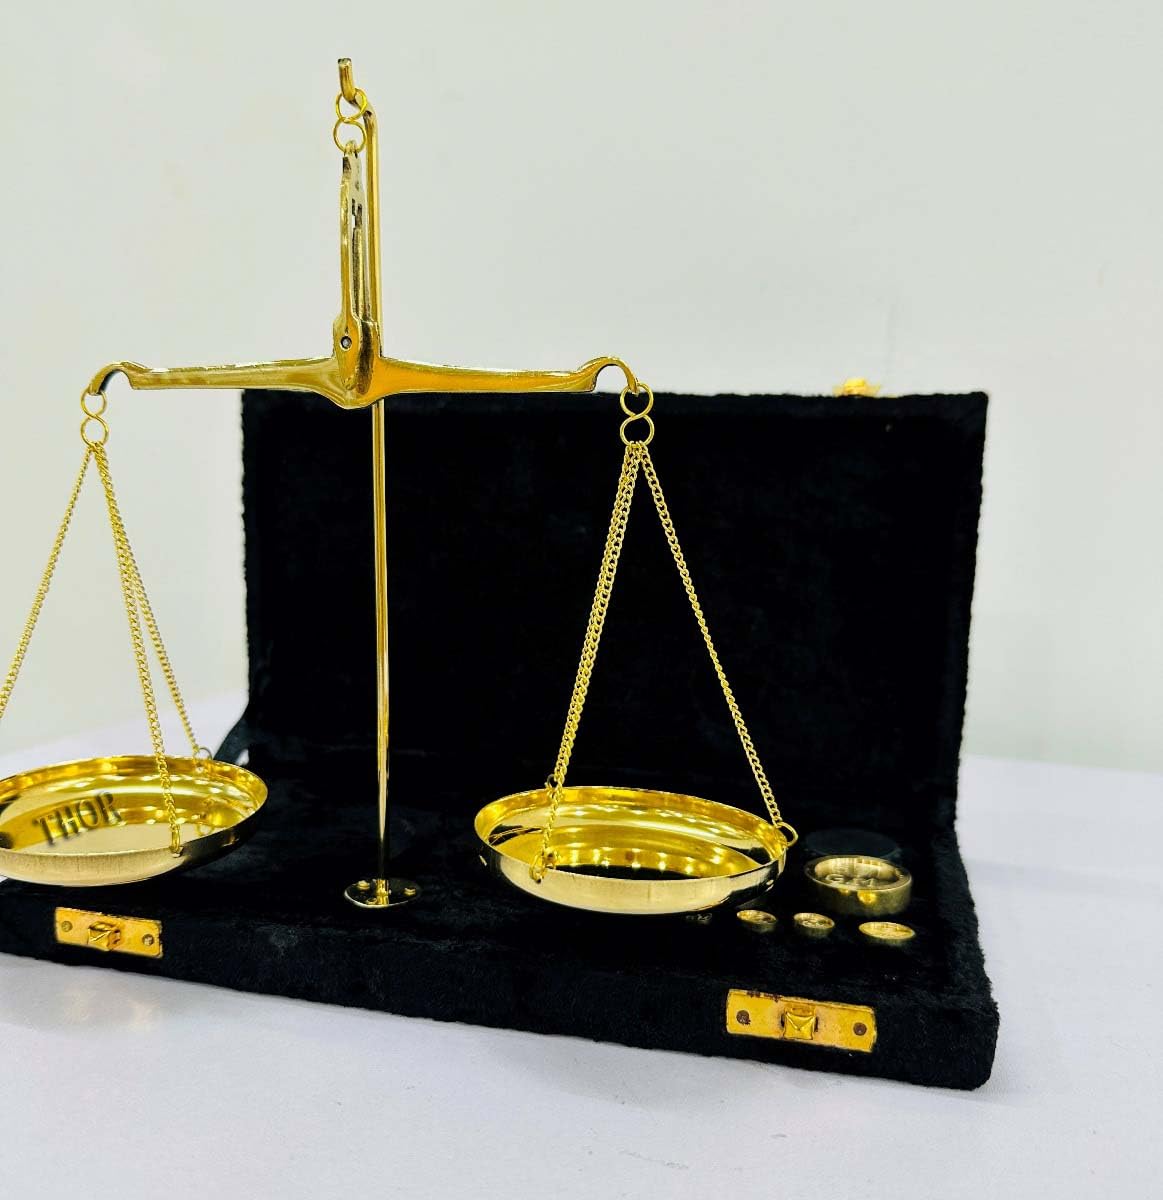 Gold Brass Jewelry Scale with Black Box Goldsmith Weight Taraju Showpiece Levels & Measuring Tool with Weight Balance 10 x 5 inches